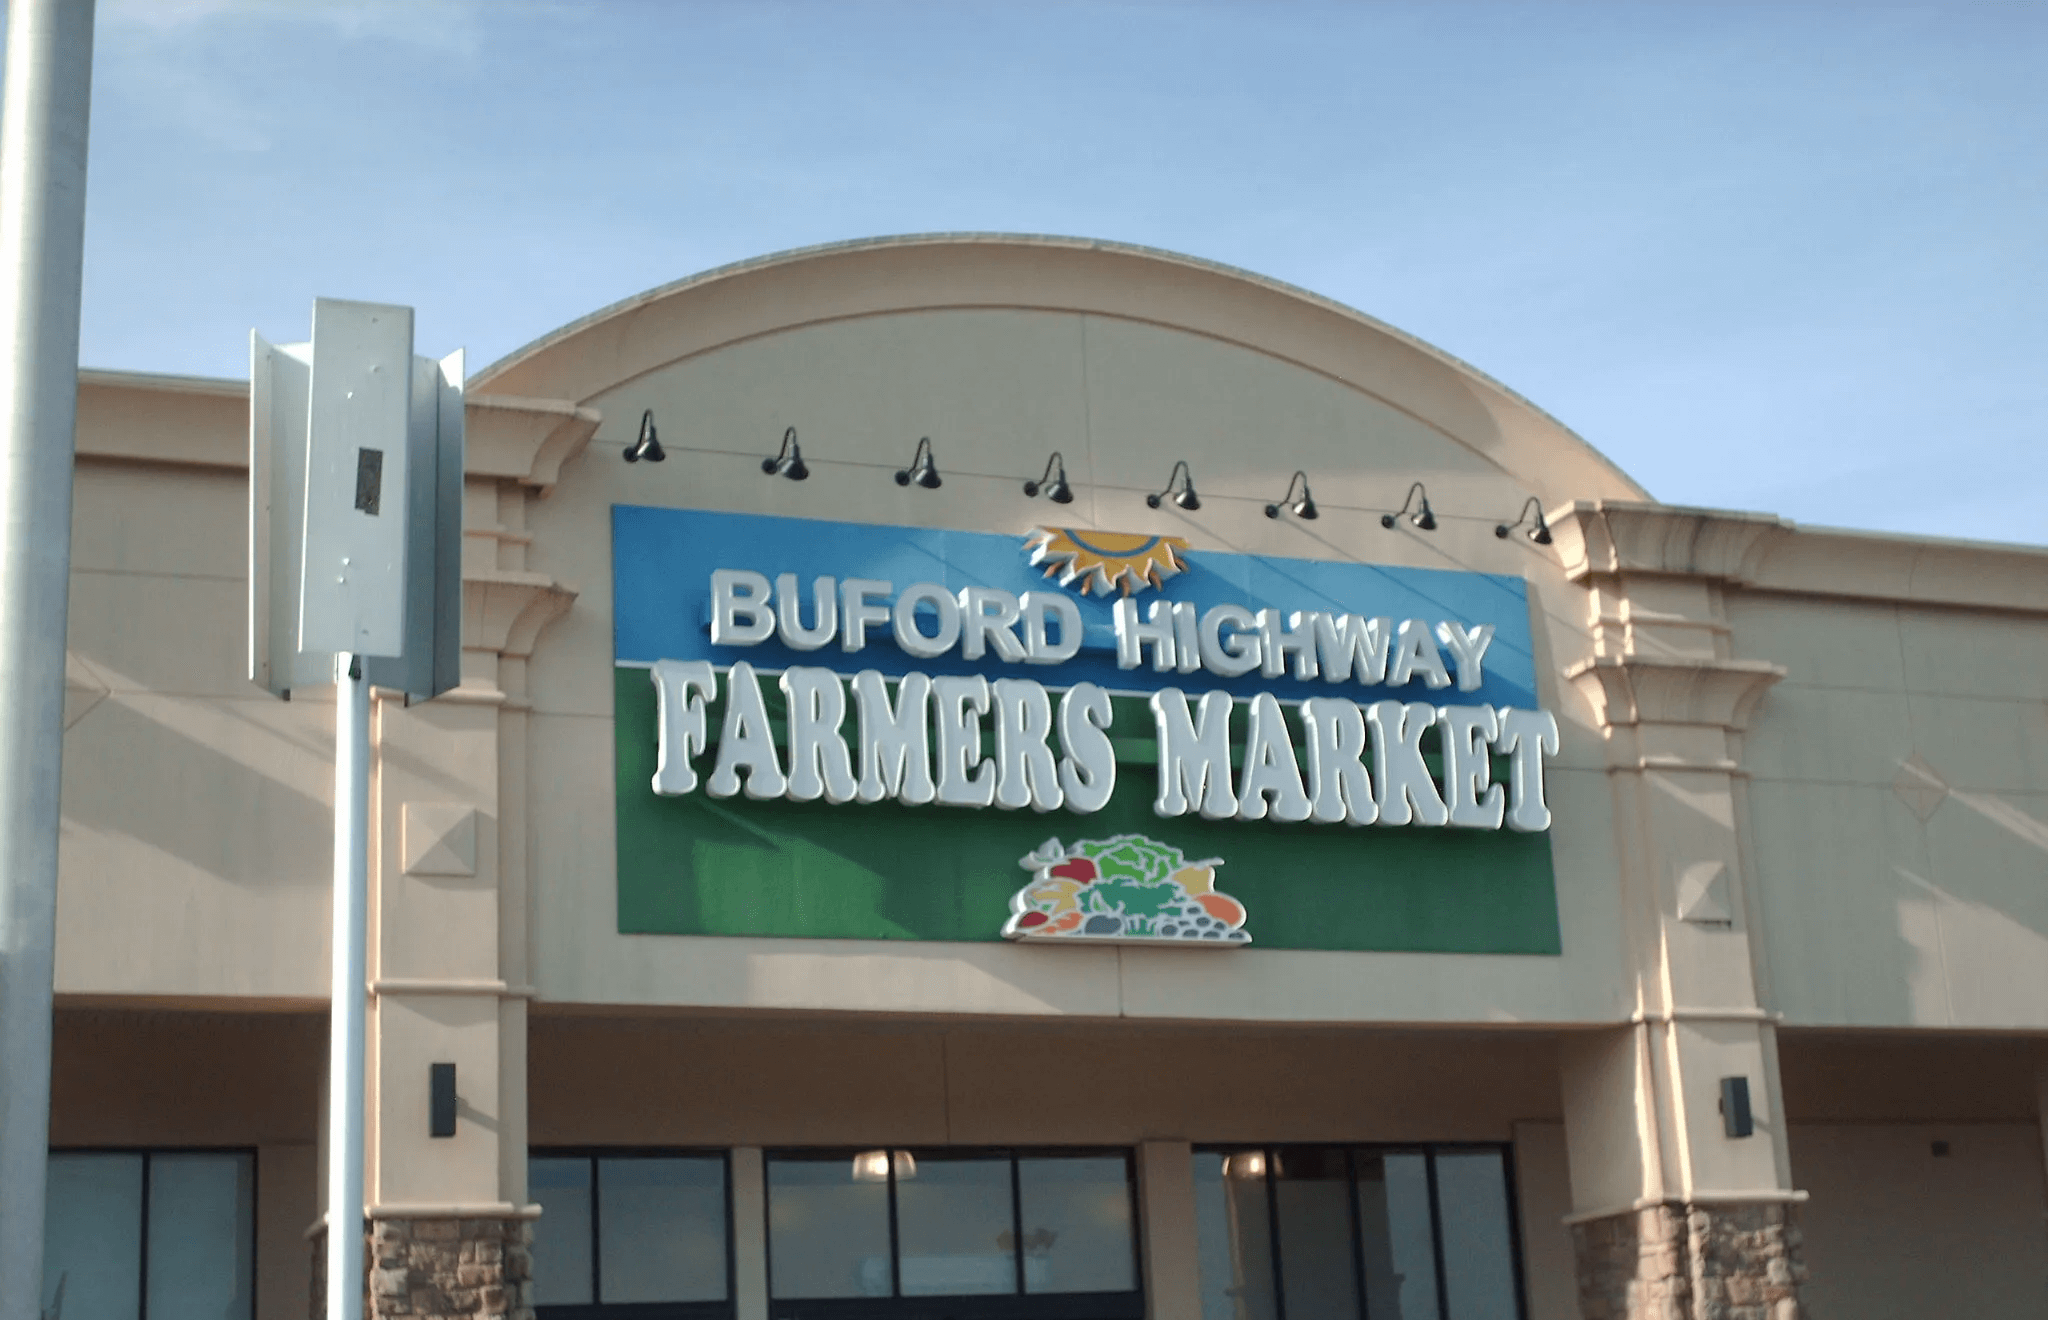 Things To Do in Buford, GA